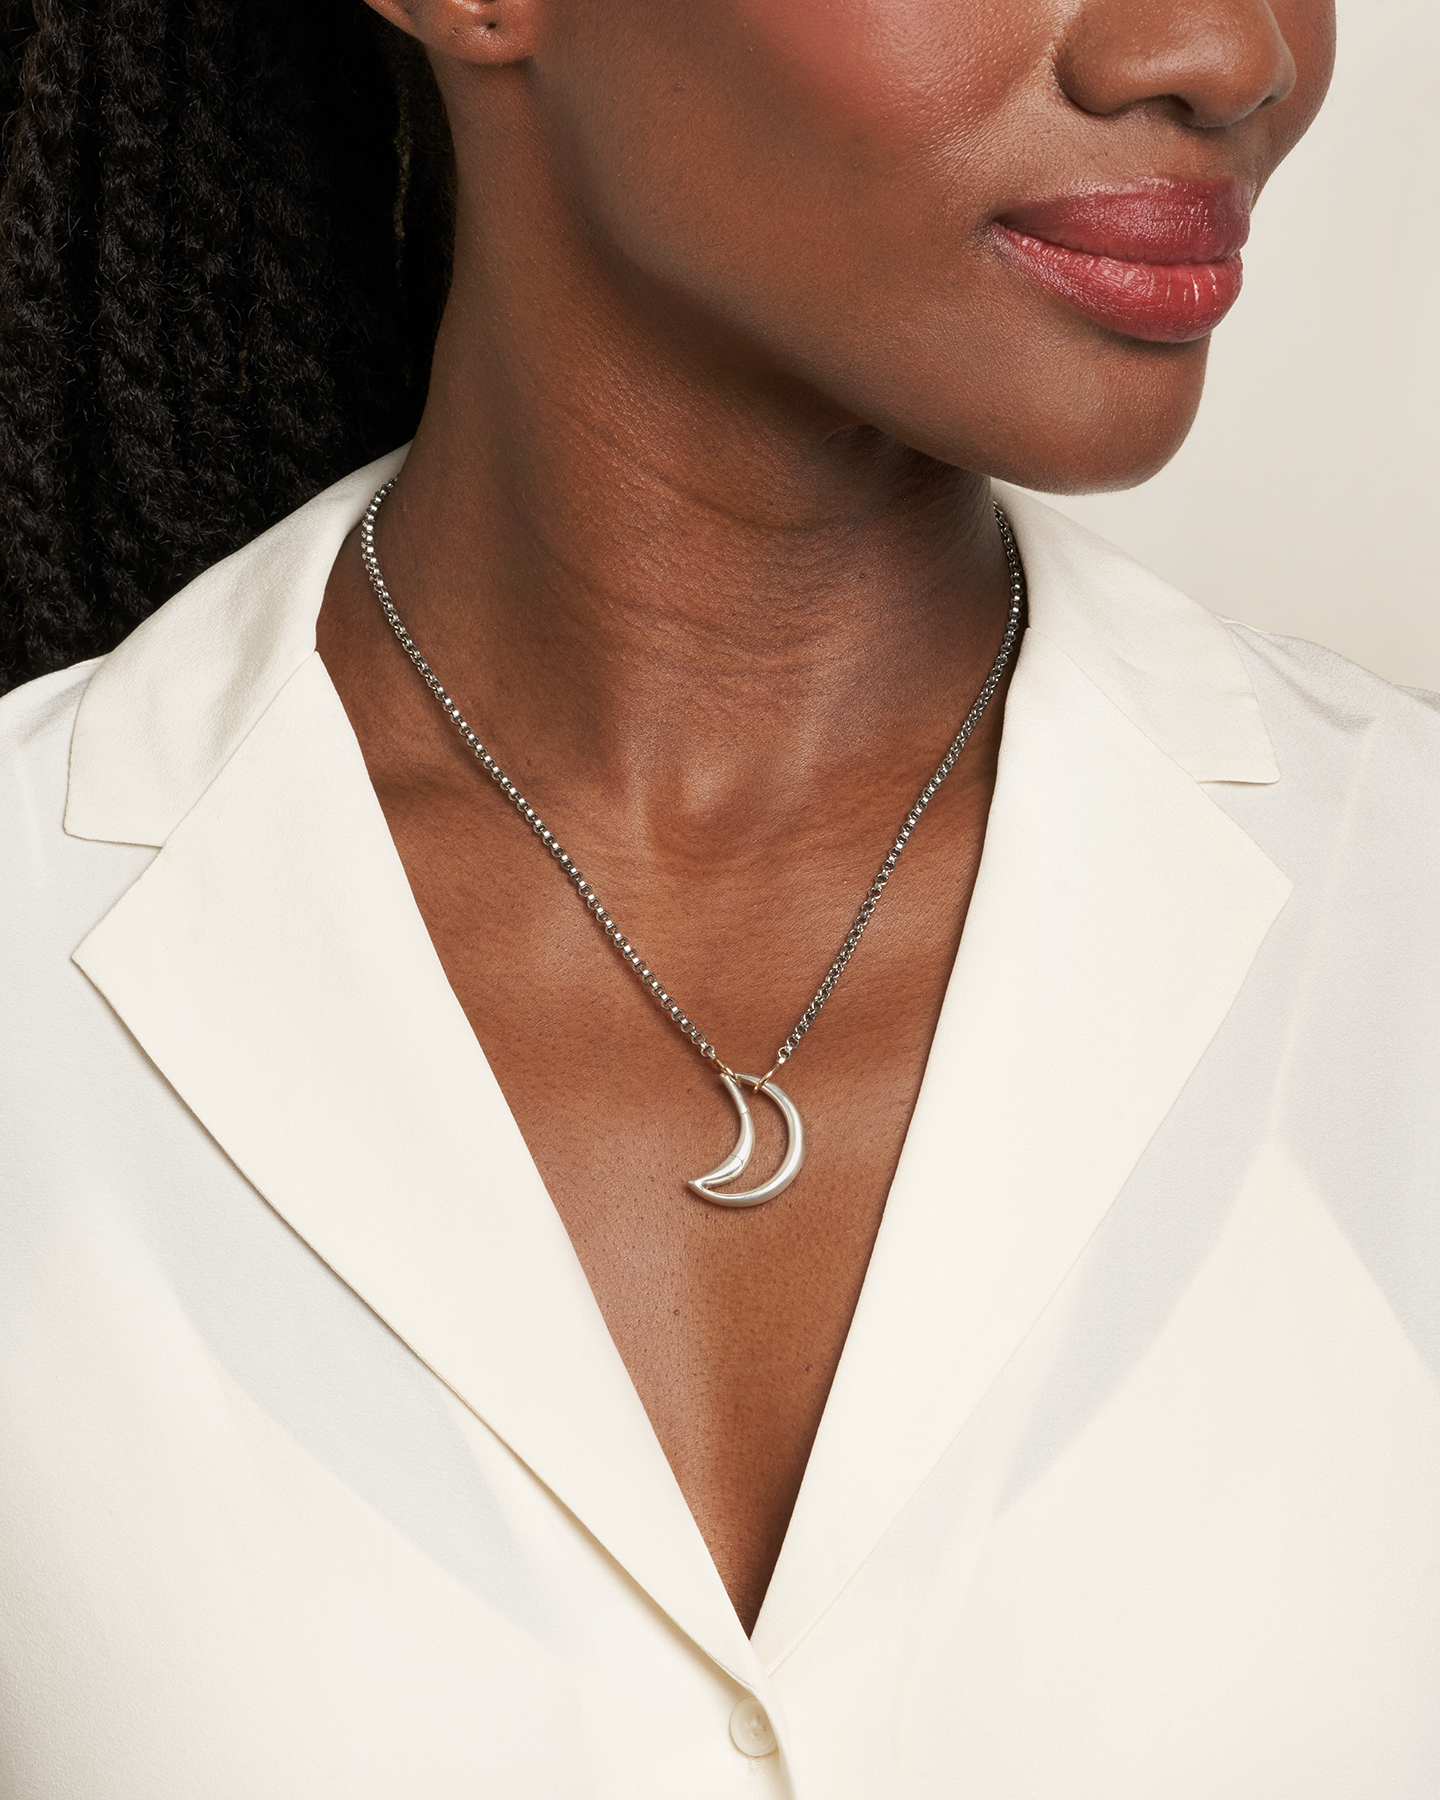 Close up of woman's decolletage wearing necklace with silver moon lock charm